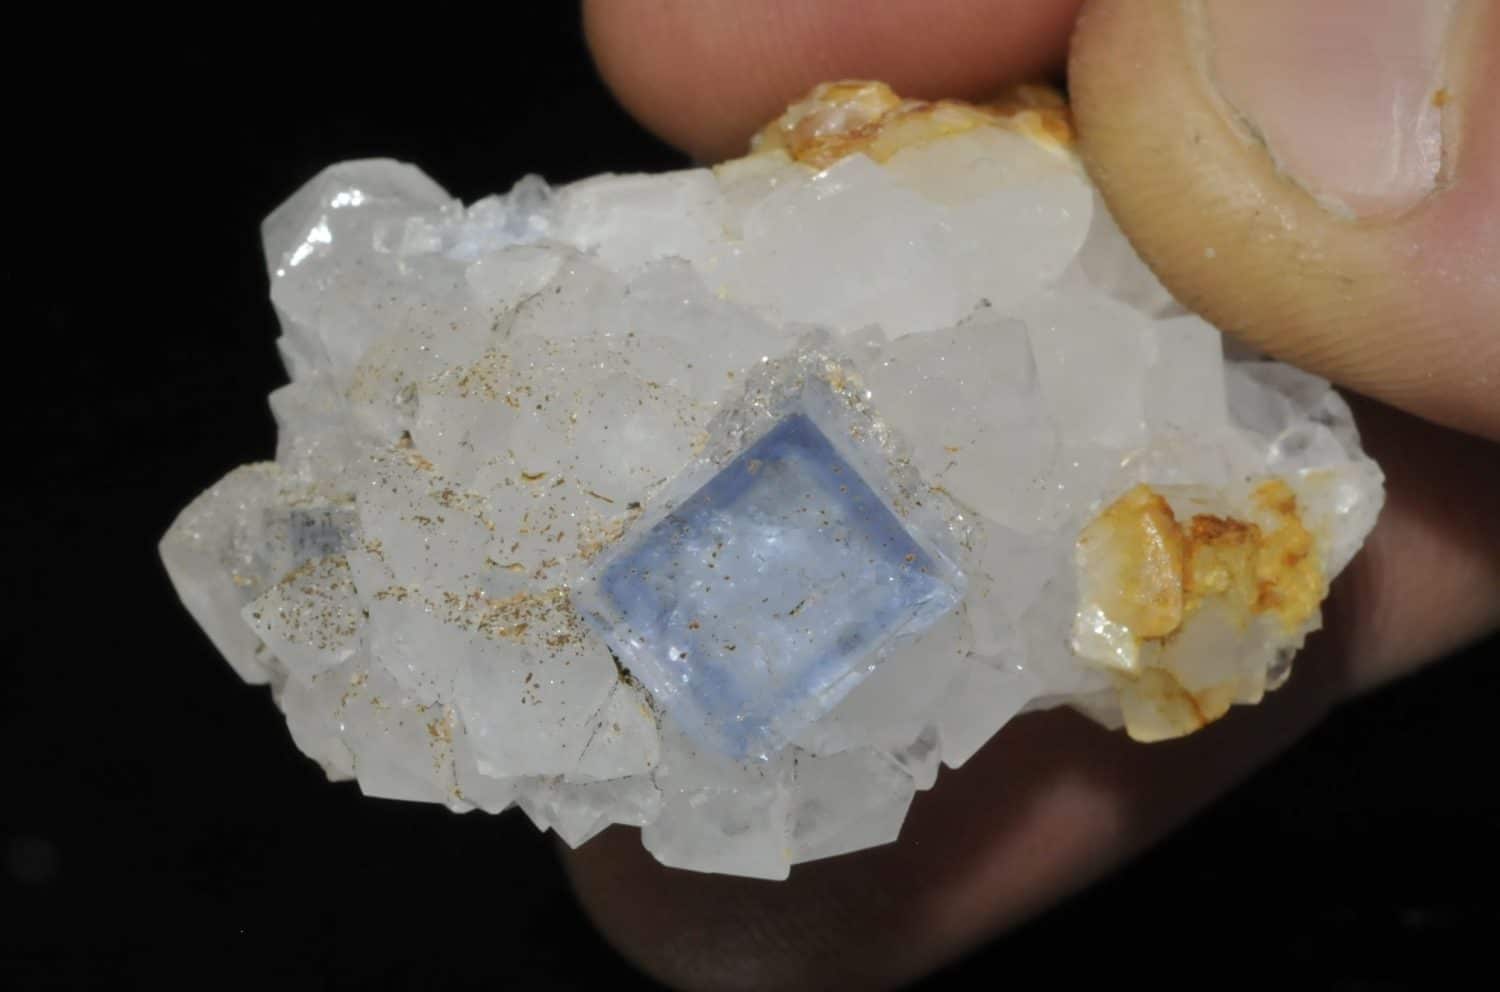 Blue fluorite and quartz from the mine of the Burc (at the Burg, Tarn, France)